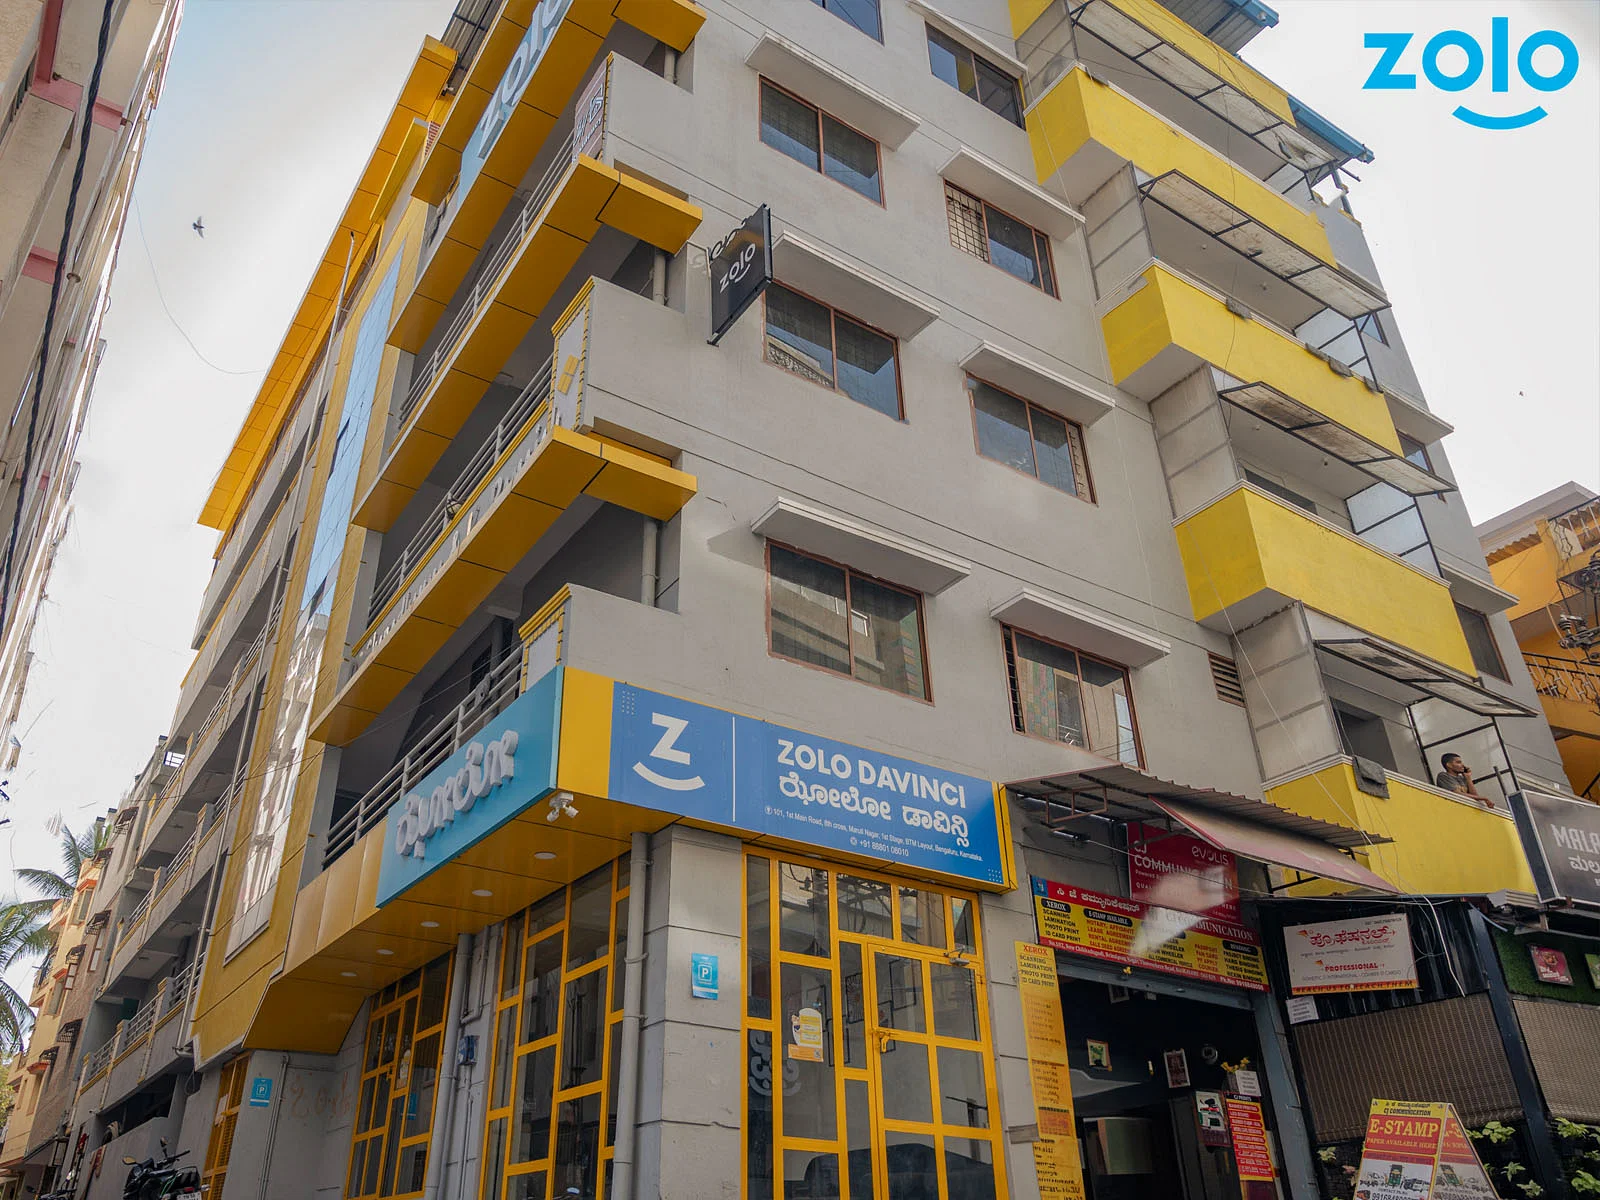 budget-friendly PGs and hostels for men and women with single rooms with daily hopusekeeping-Zolo Davinci